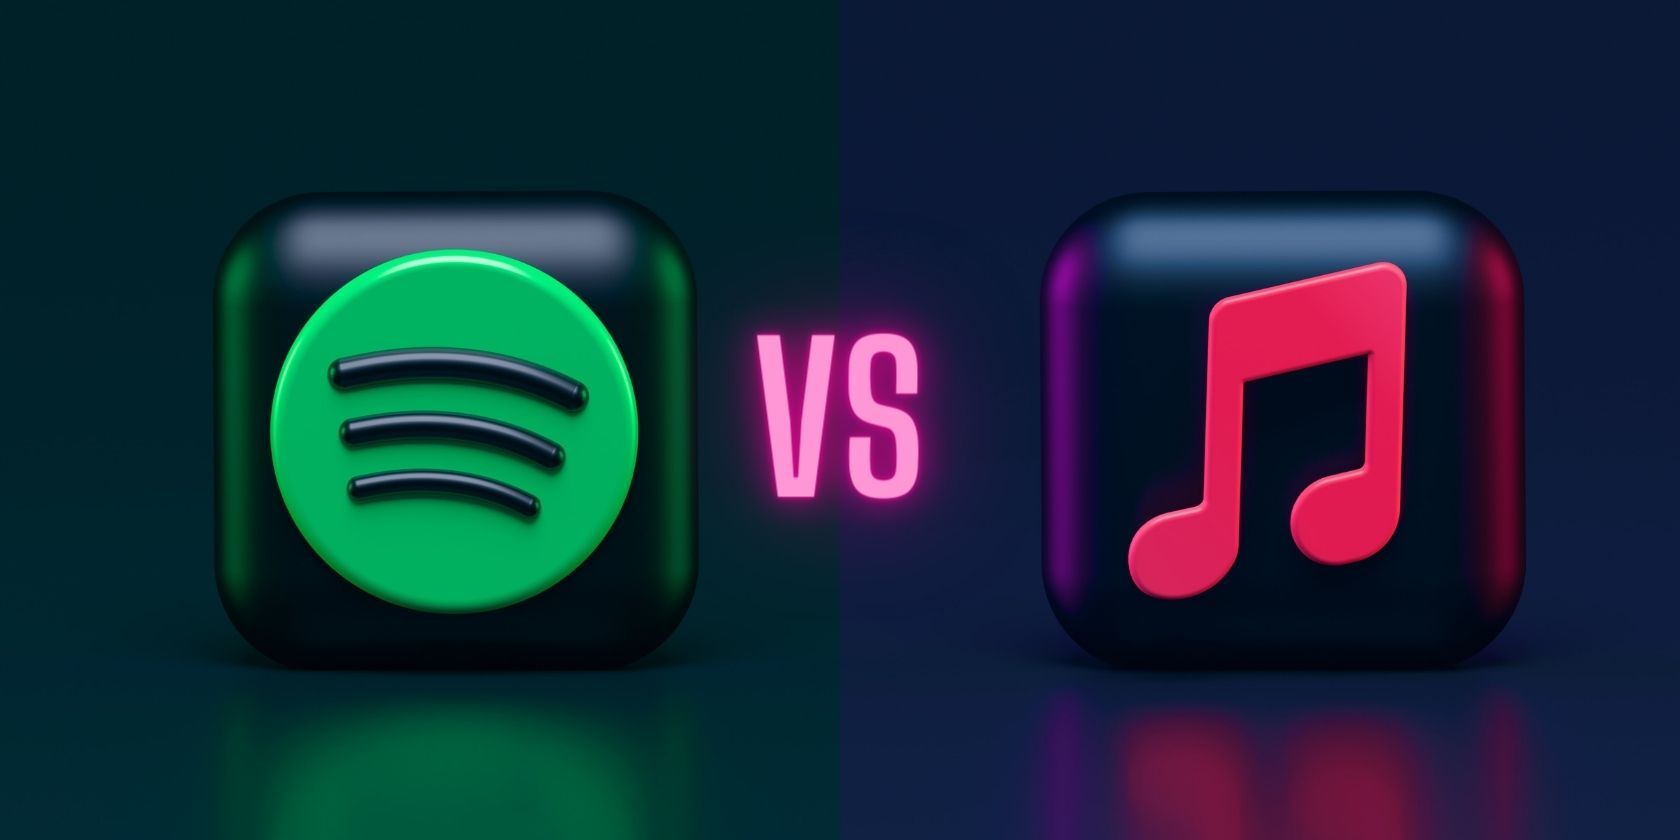 Spotify and Apple Music logo illustrations side by side